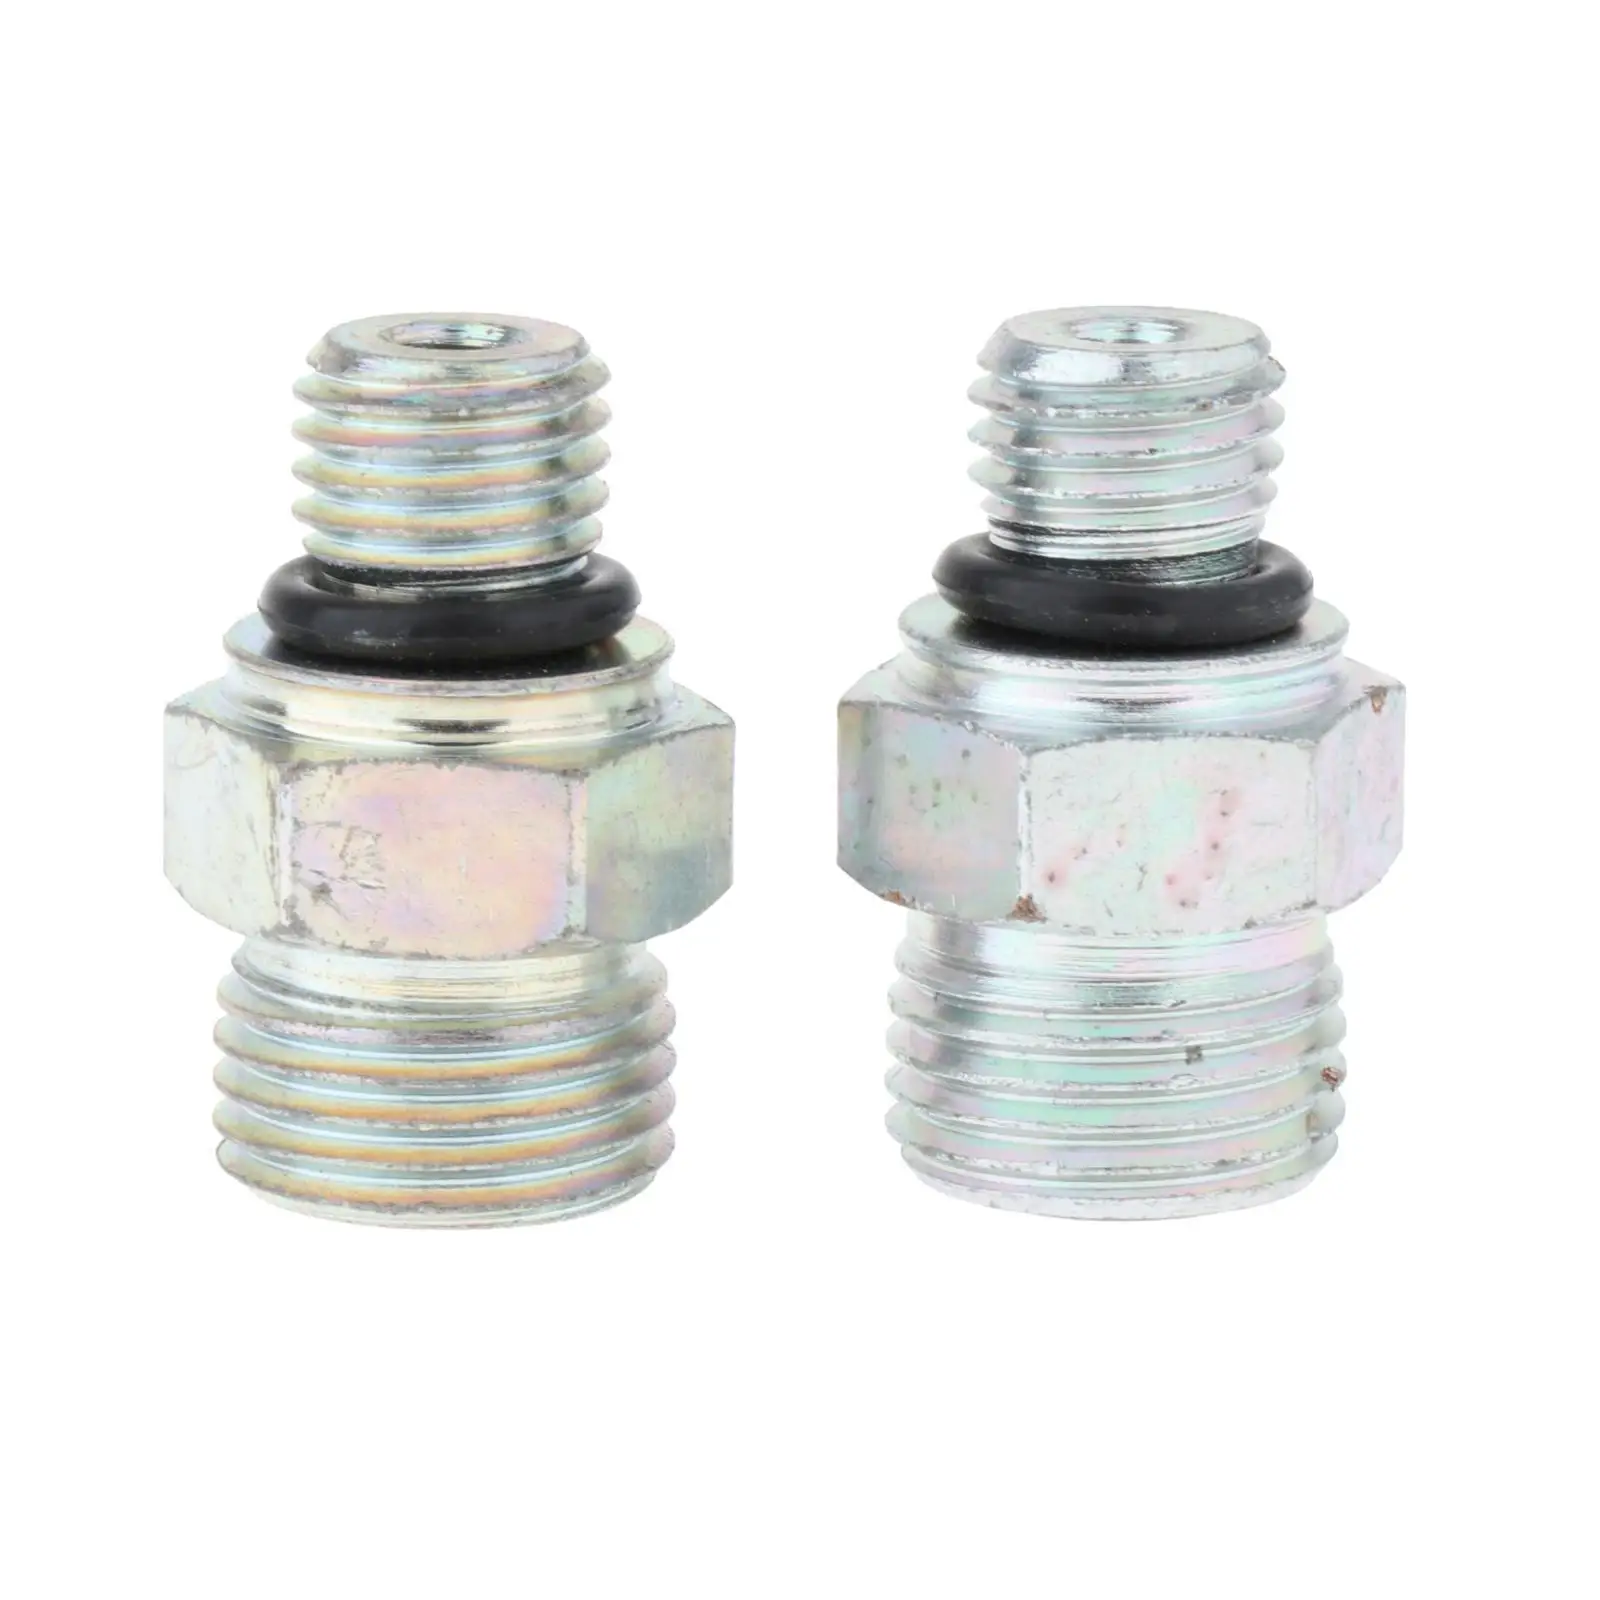 2 Pieces Connectors Joints Accessory Metal Turbo Oil Supply Line Fitting for Vehicle Auto Parts Automotive Car Engine Parts